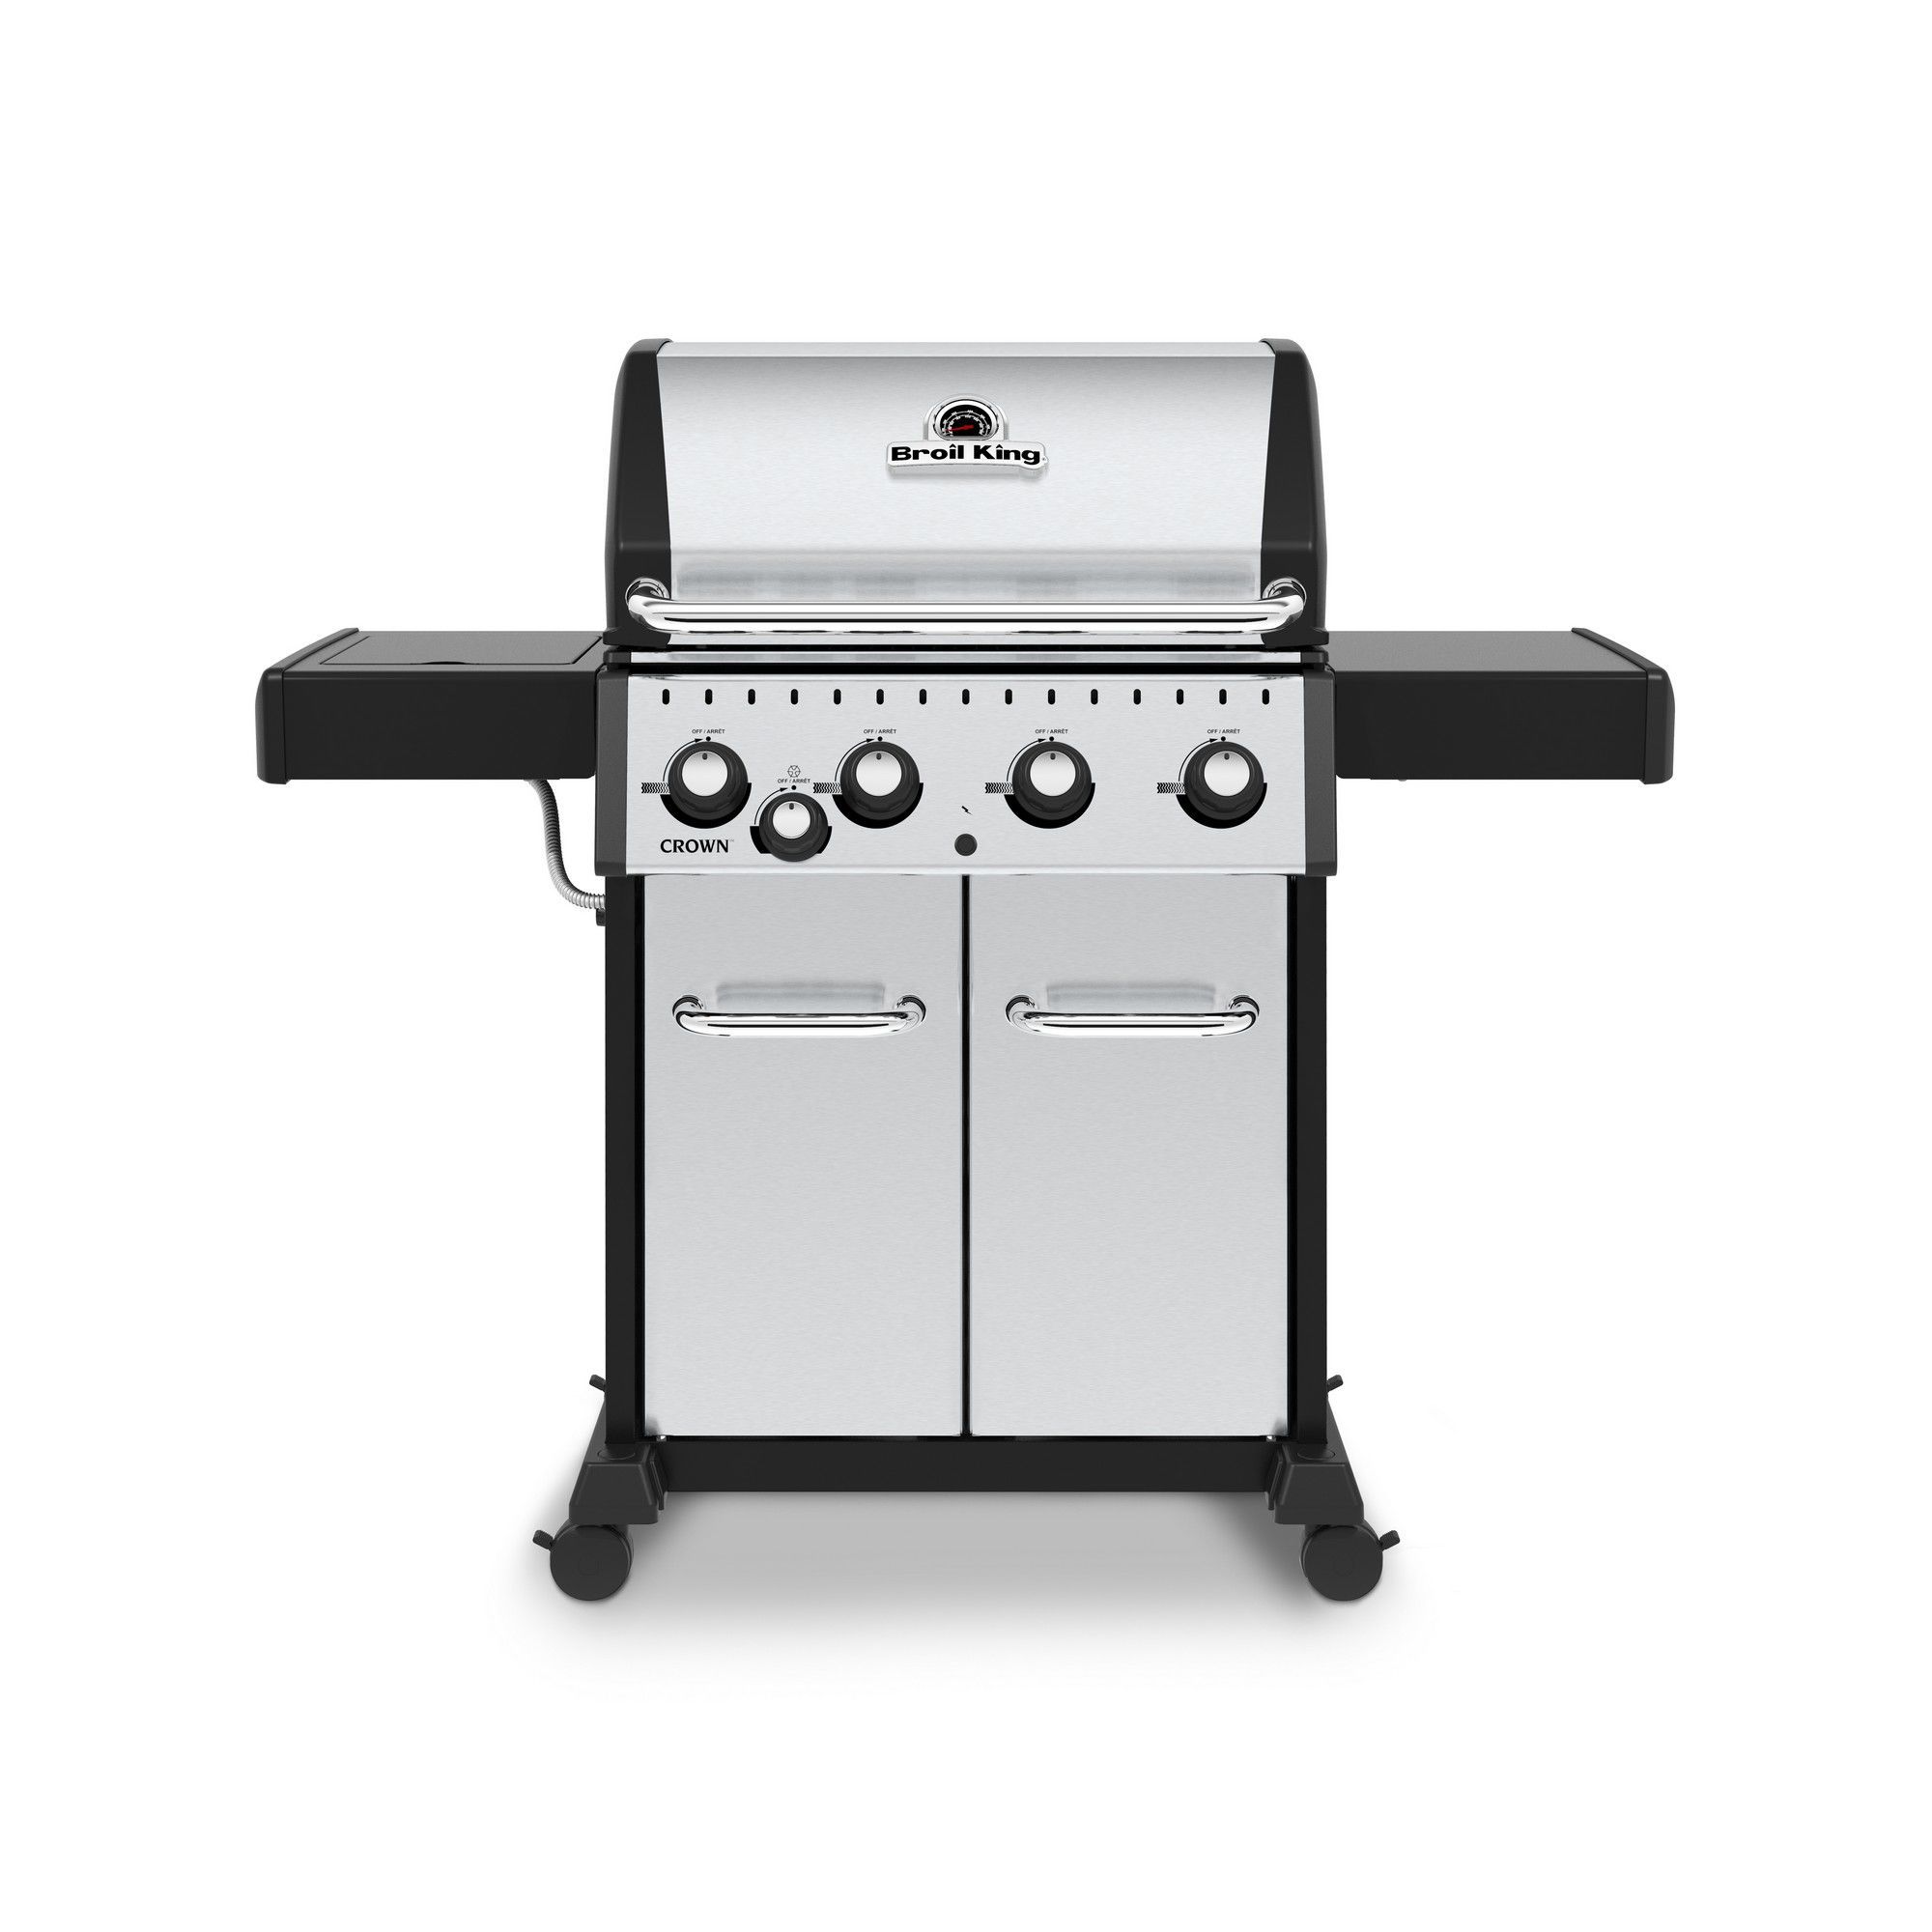 Gas Barbecues - Barbecues (BBQ) and Outdoor Cooking